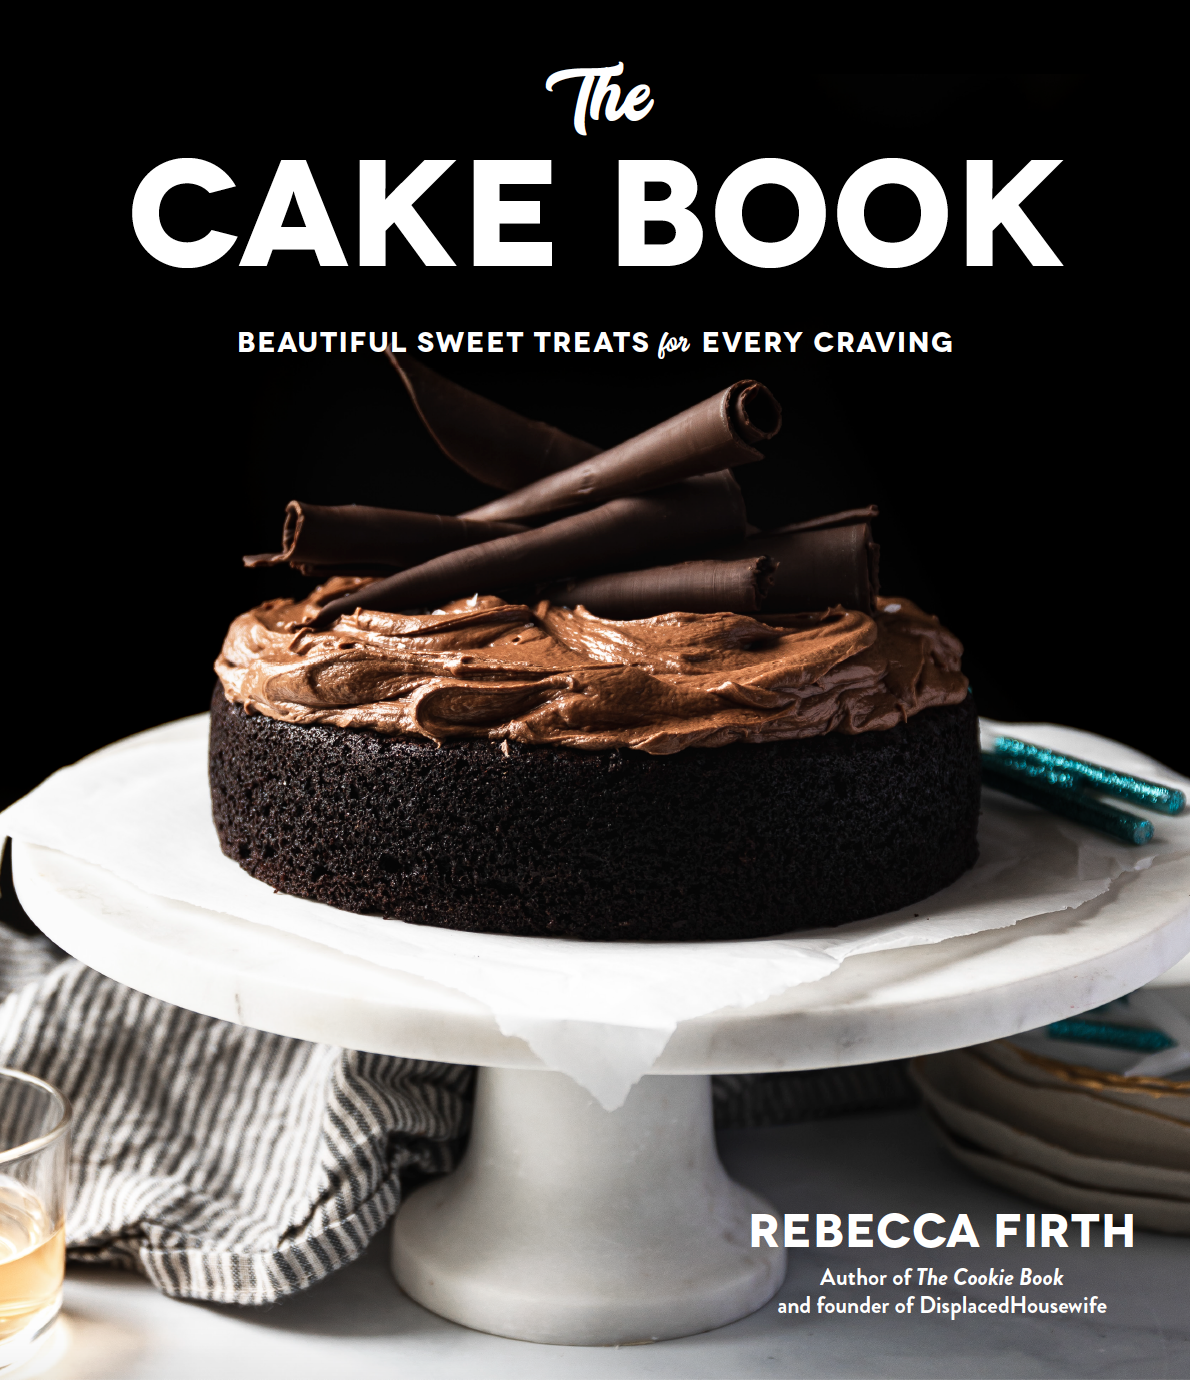 https://www.displacedhousewife.com/wp-content/uploads/2021/07/the-cake-book-cover.png